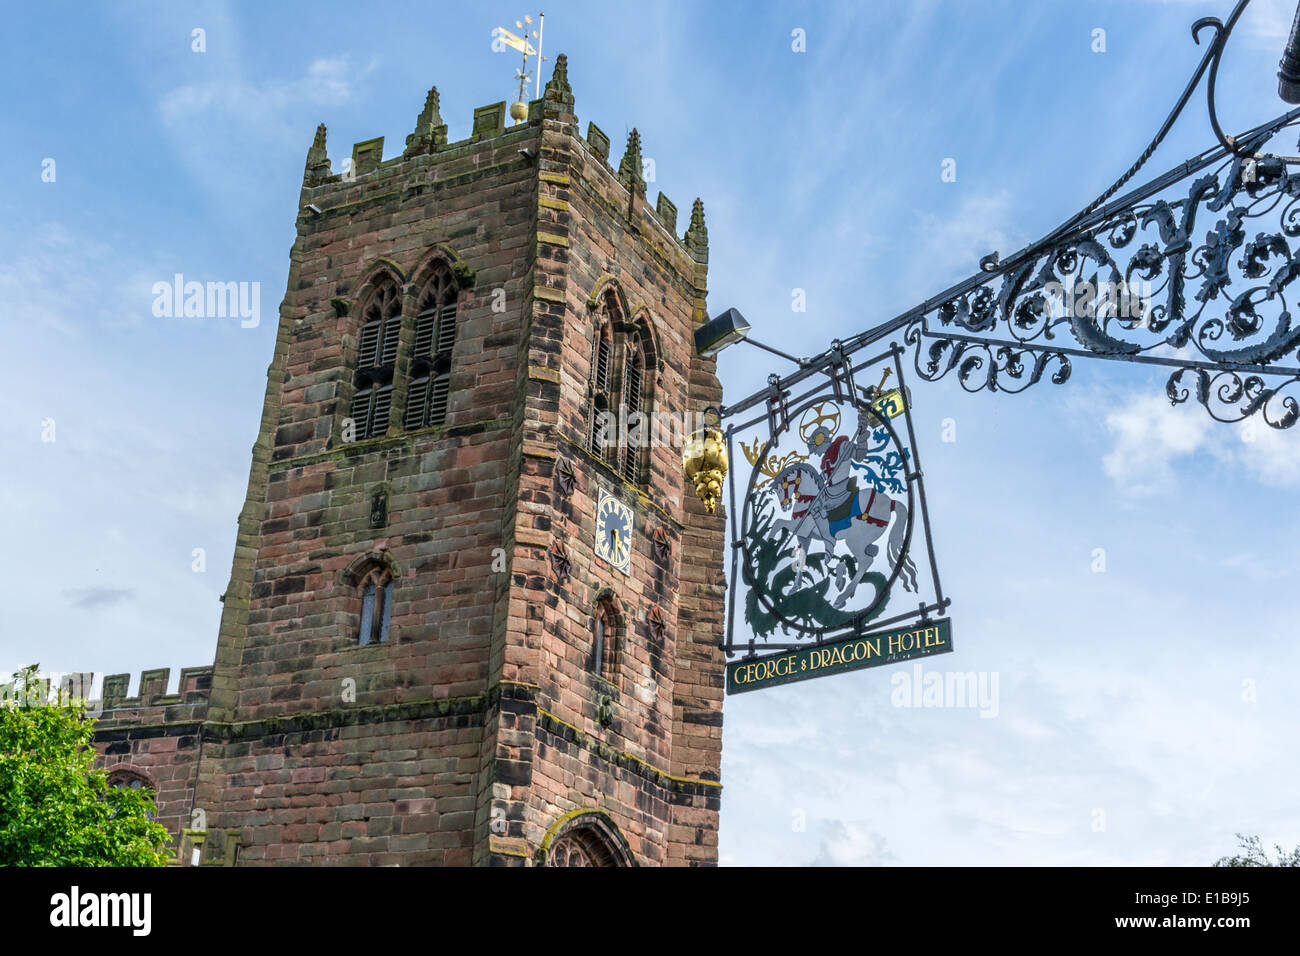 View of village church at Great Budworth, Cheshire. Photo taken from outside the George and Dragon pub. Stock Photo